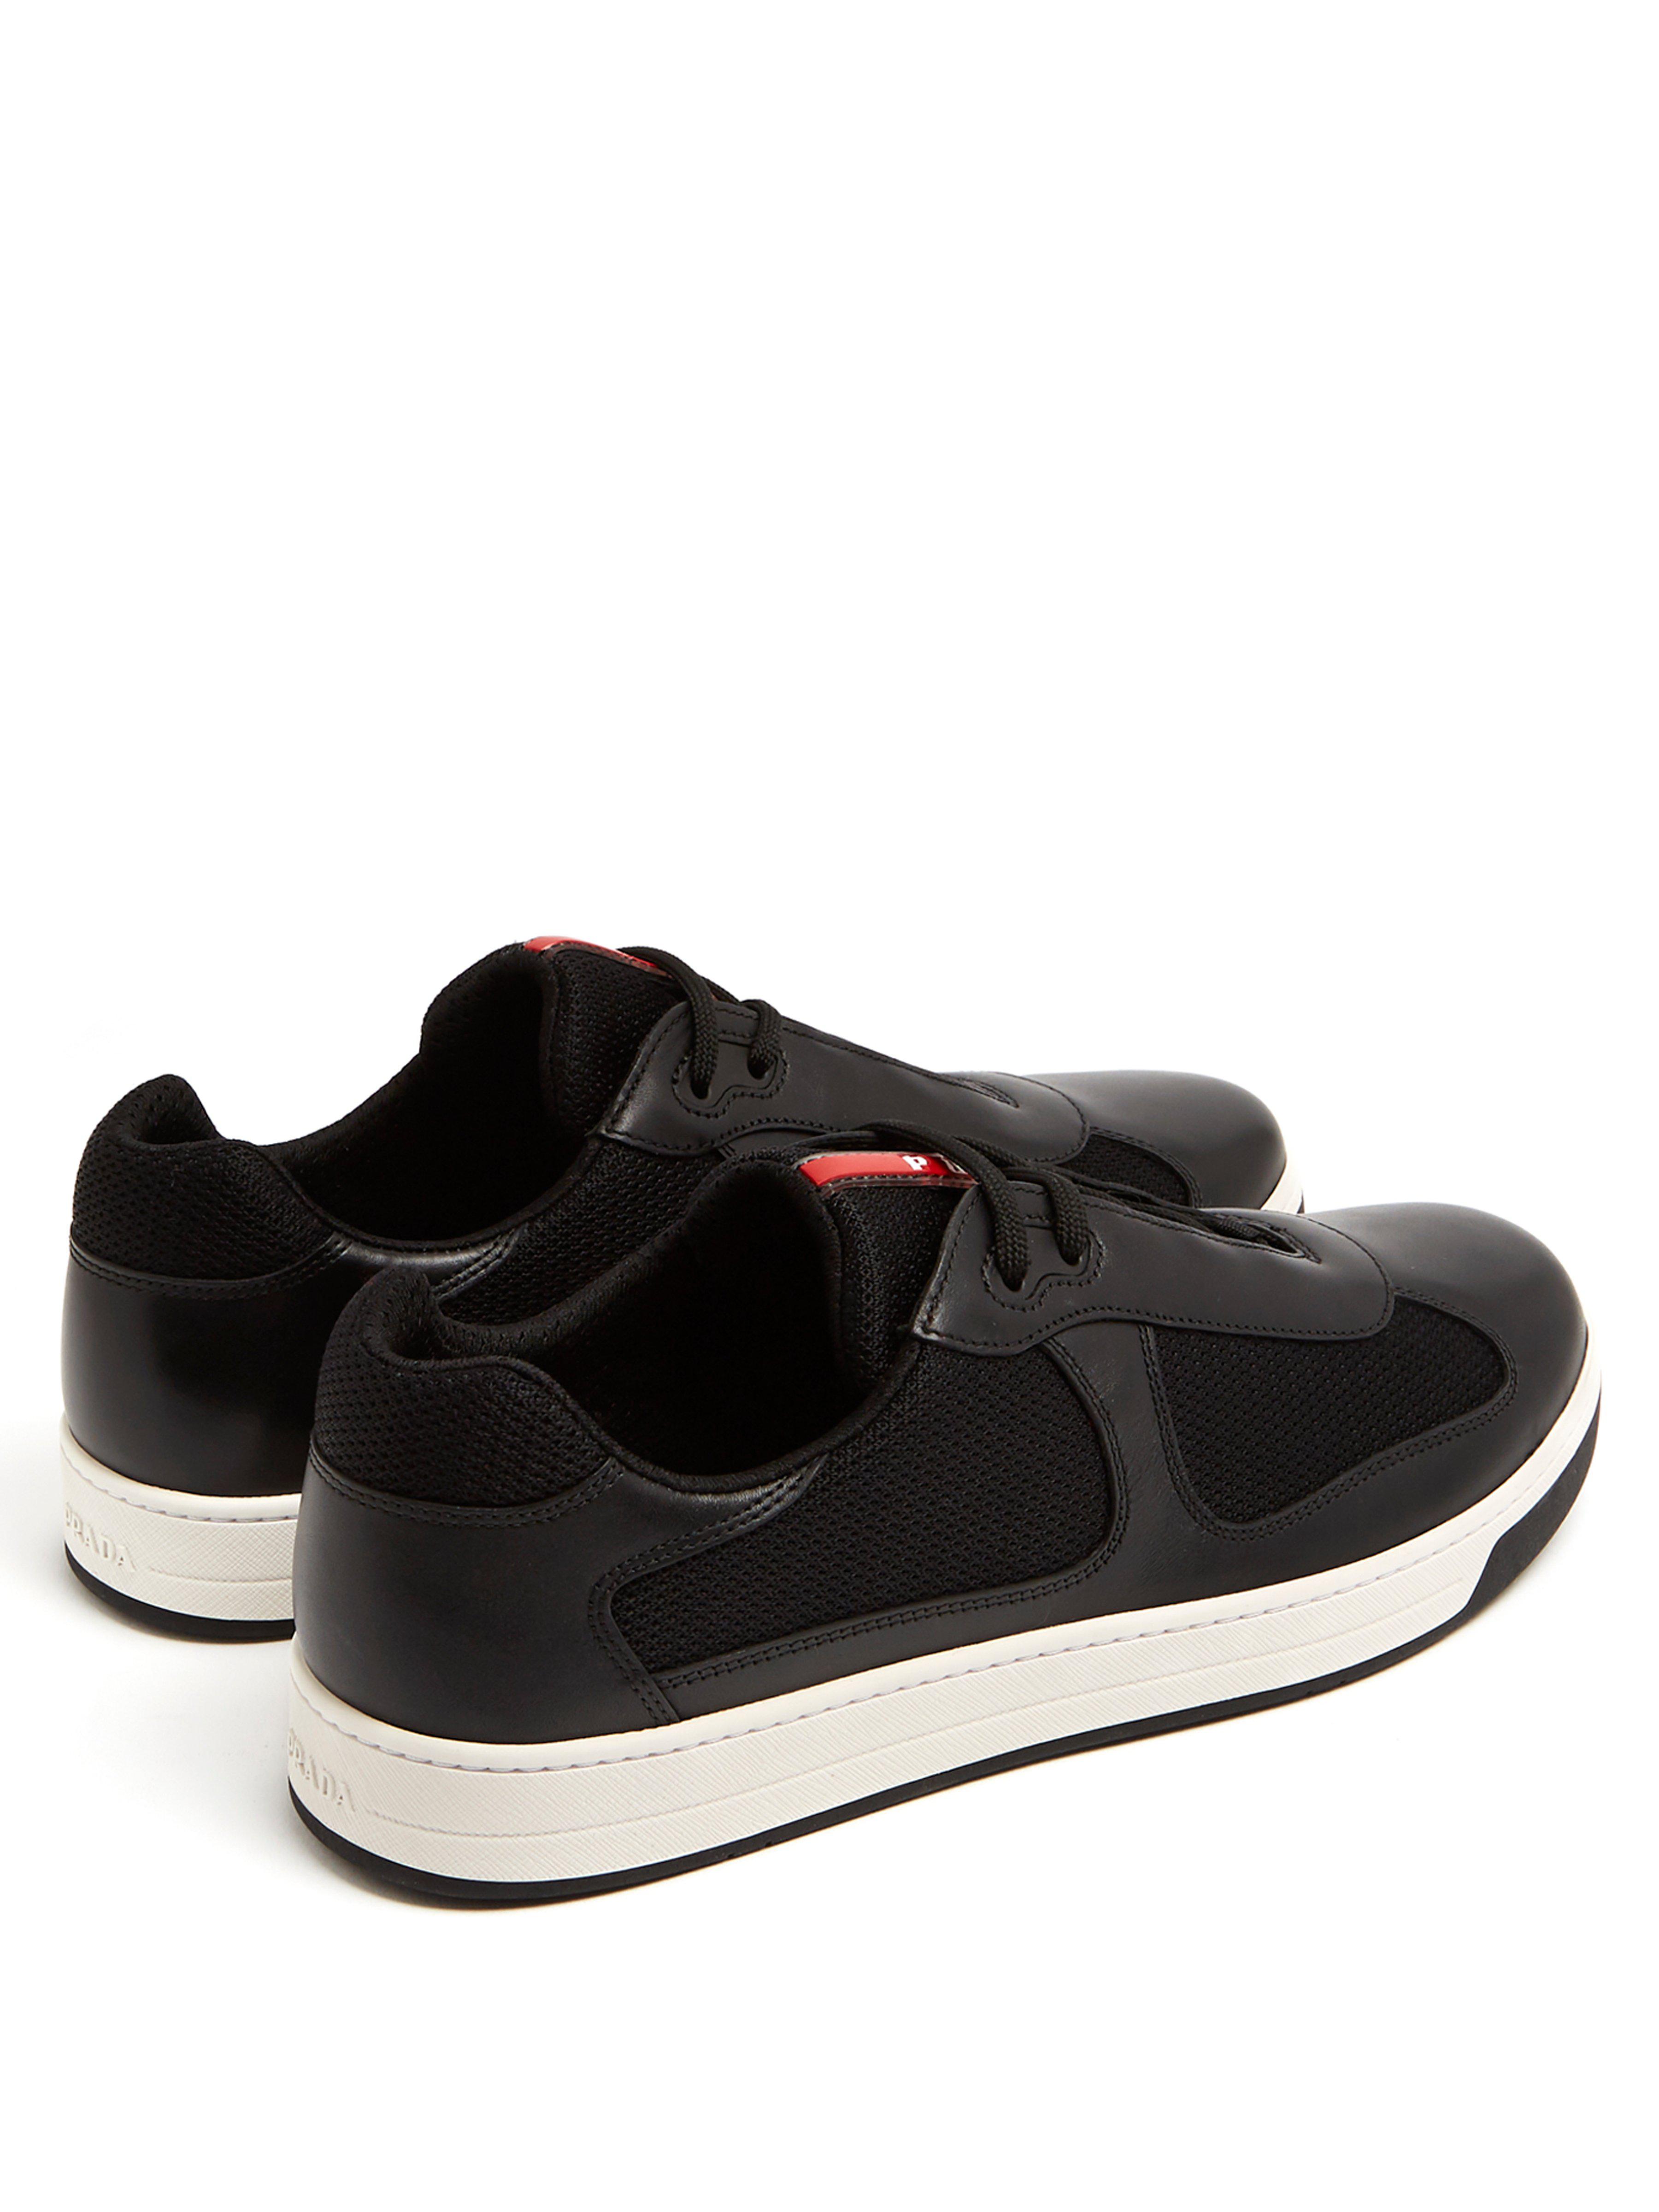 Prada Leather Nevada Bike Low Top Trainers in Black for Men - Lyst